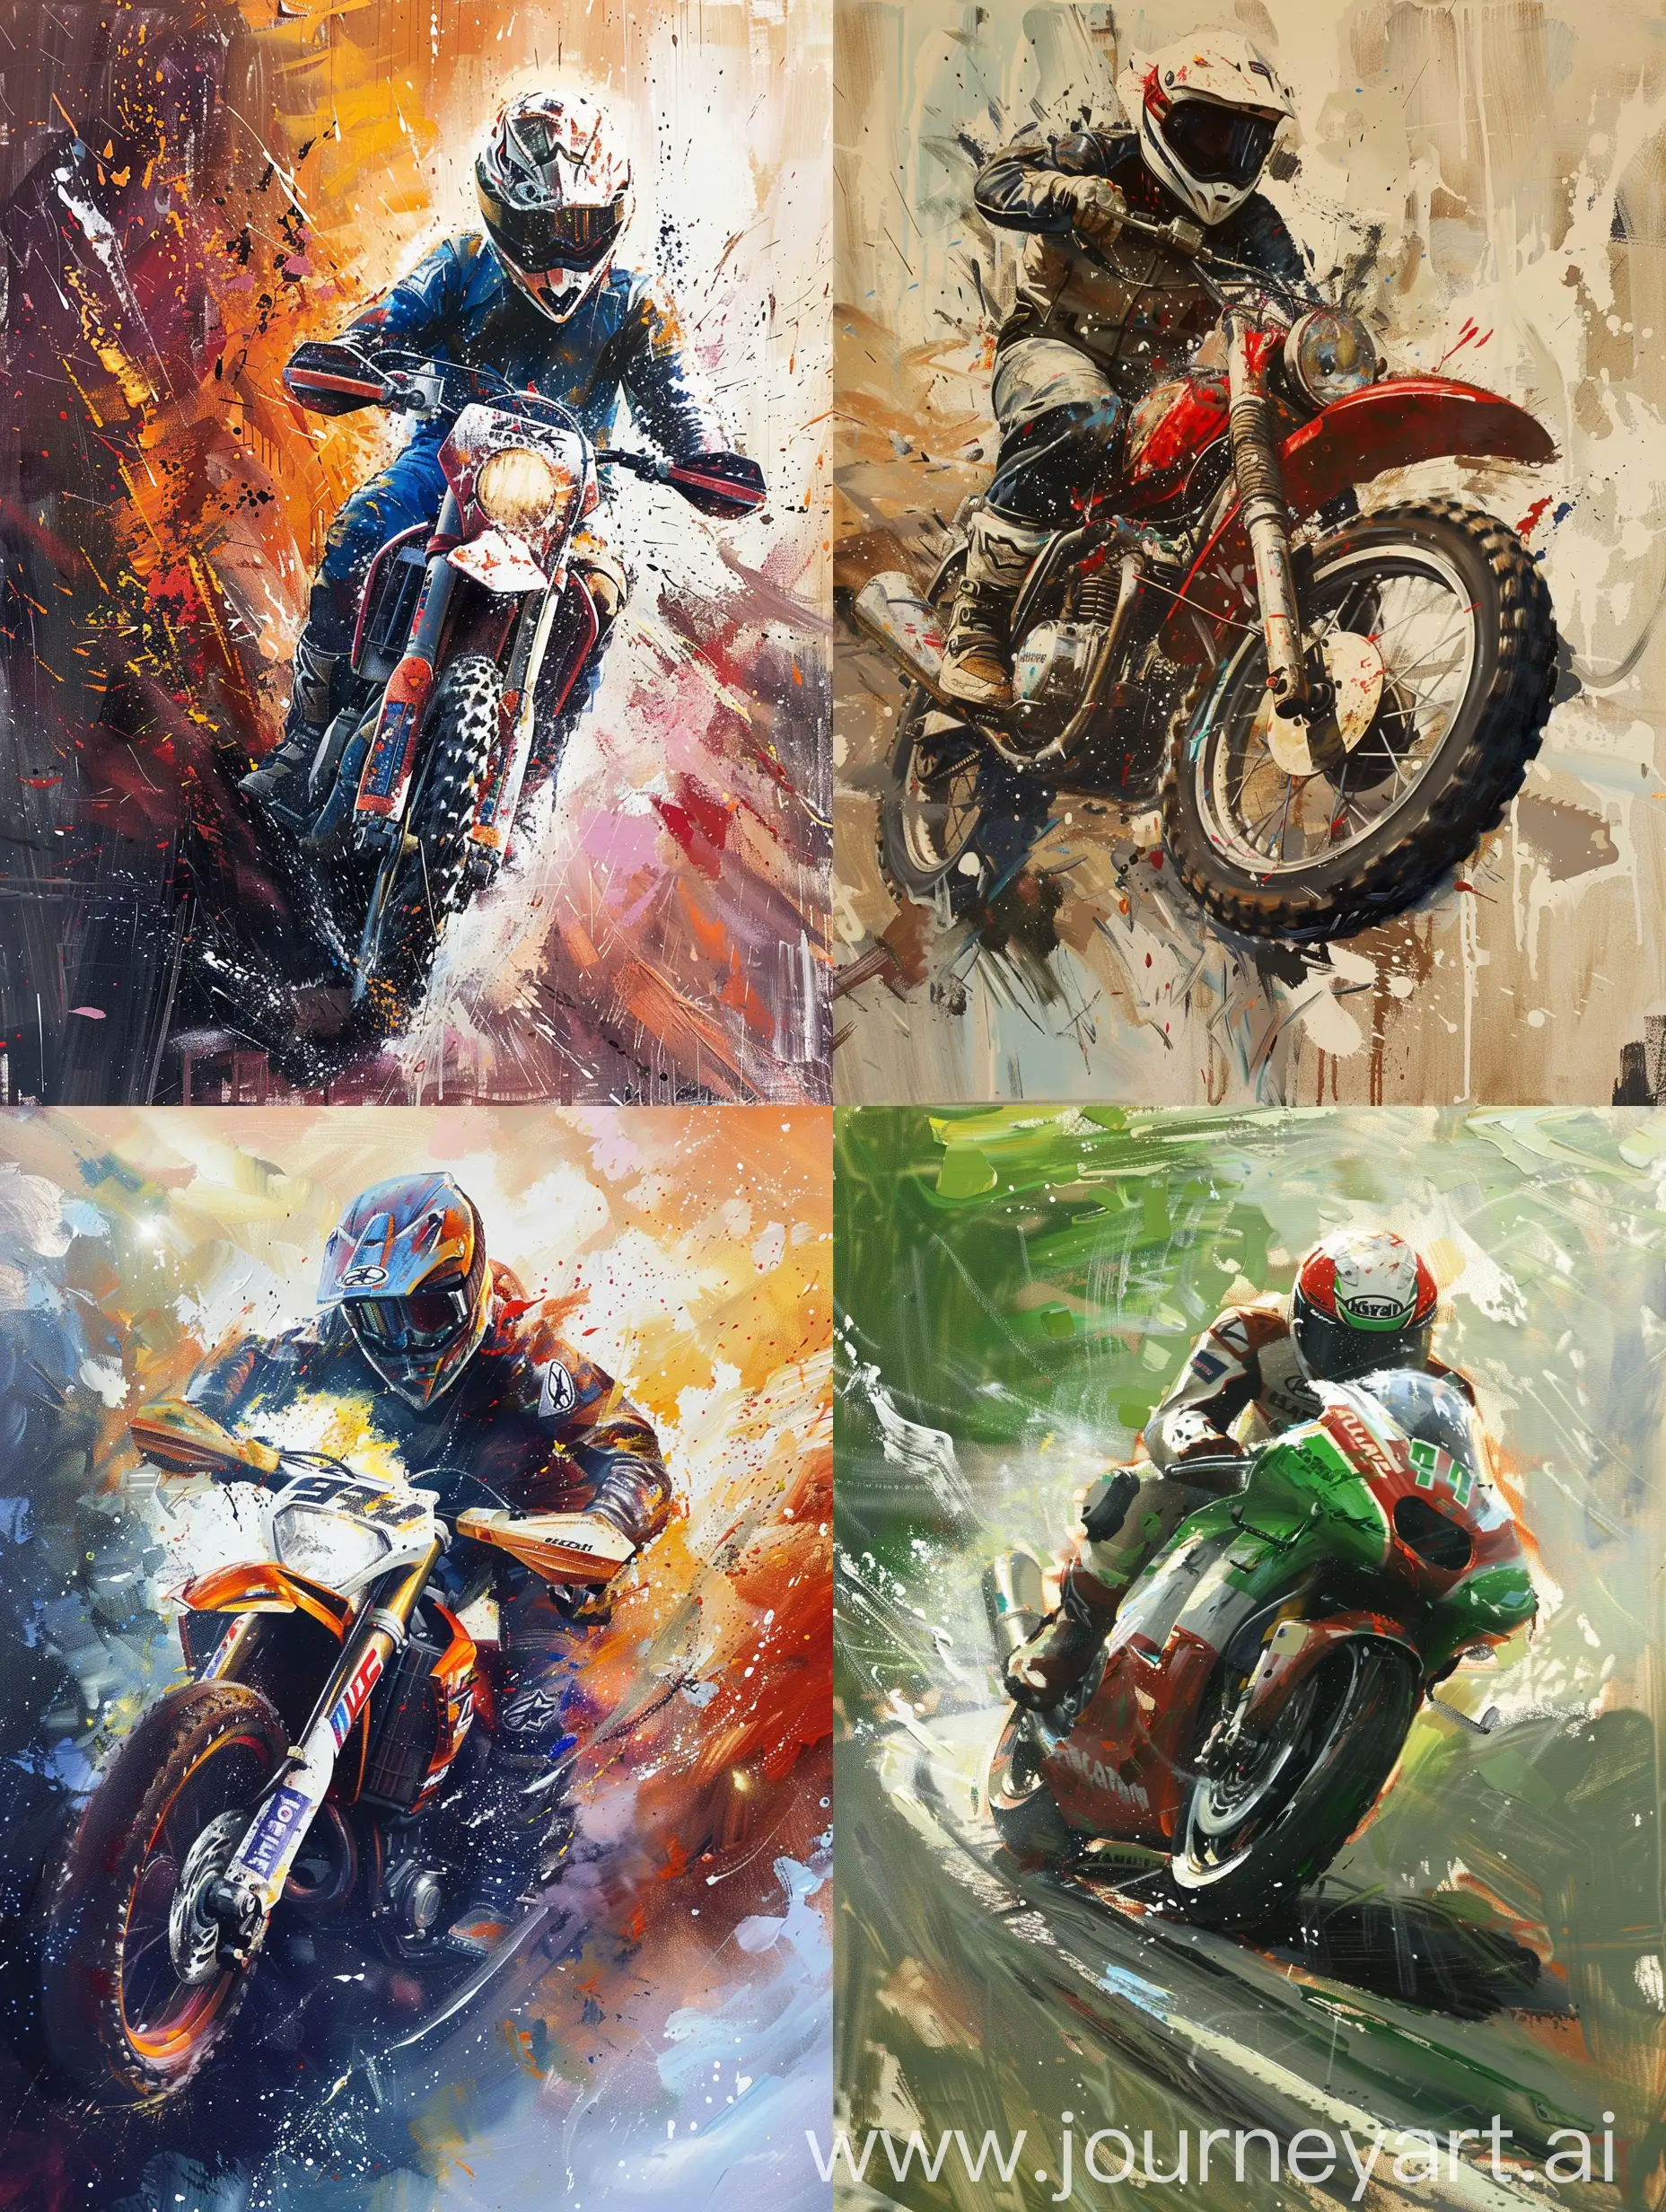 Vibrant-Motorcycle-Racing-Art-Dynamic-Action-with-Oil-Paints-and-Sprays